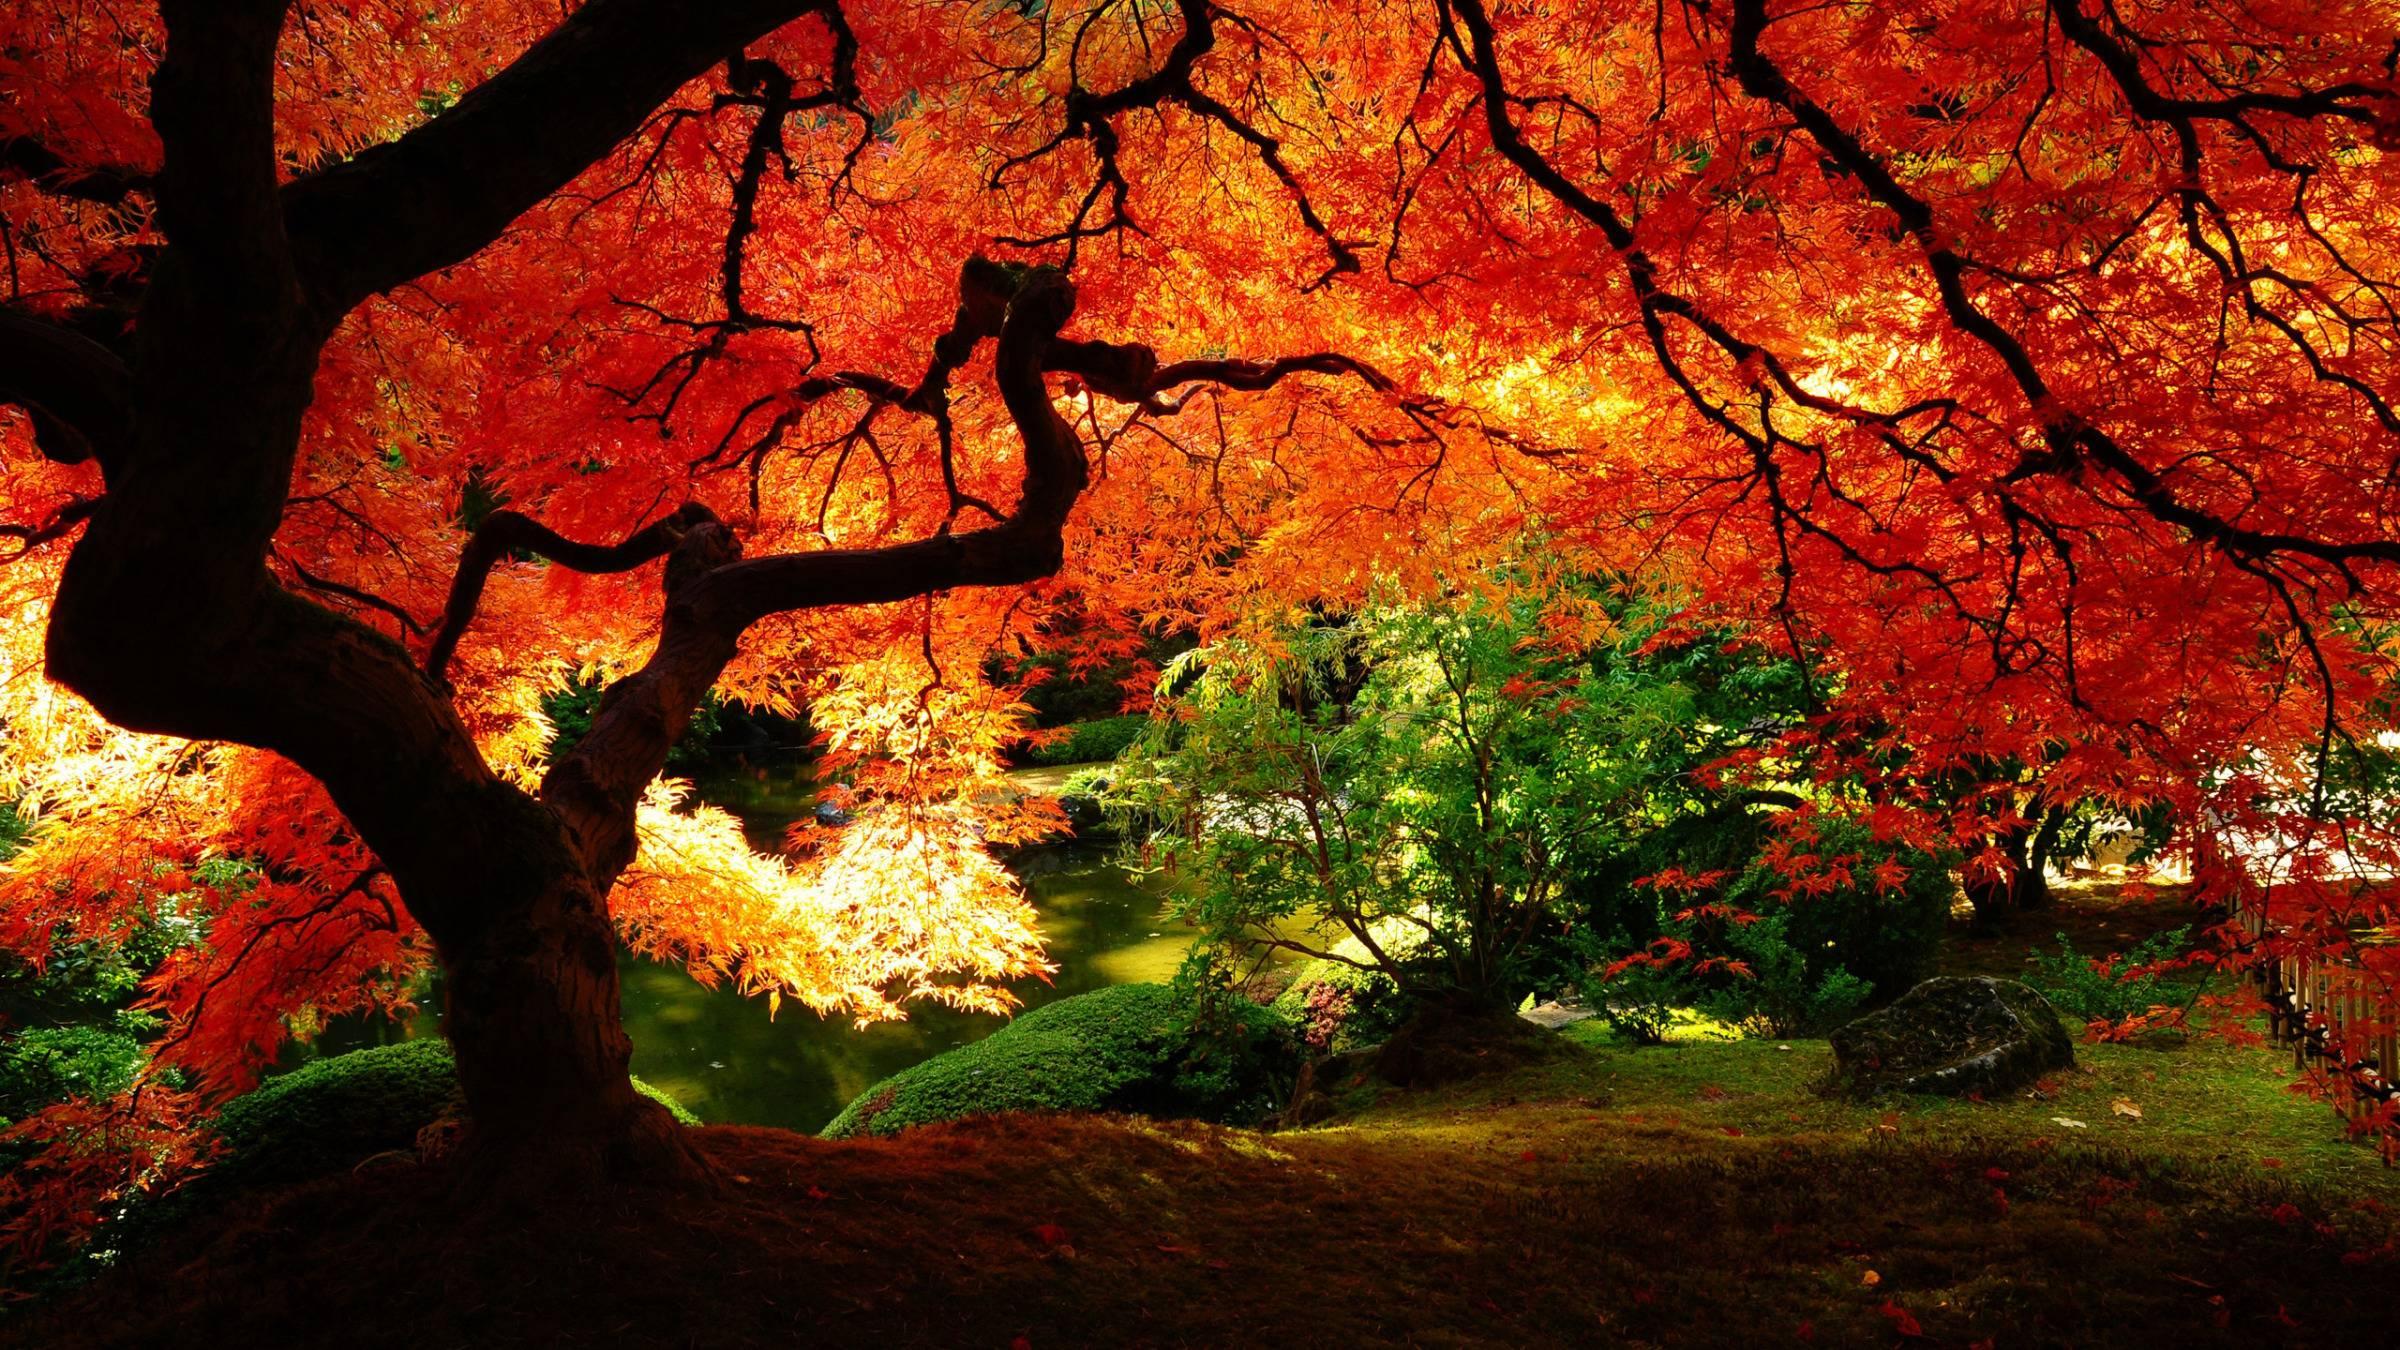 2400 x 1350 · jpeg - Japanese Scenery Wallpapers - Wallpaper Cave